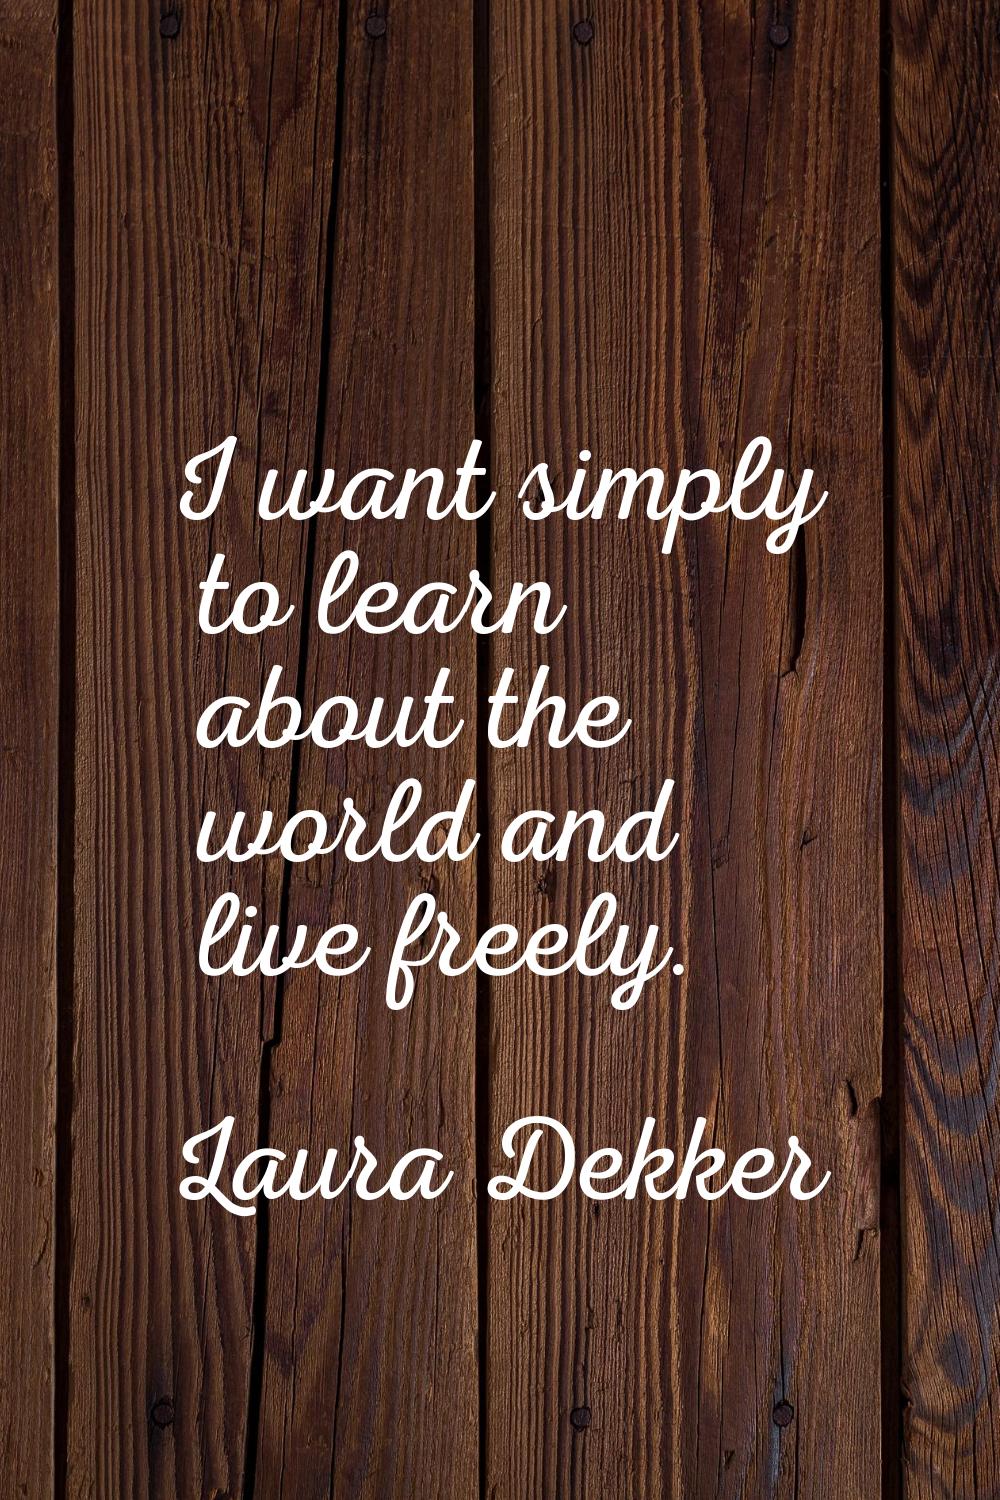 I want simply to learn about the world and live freely.